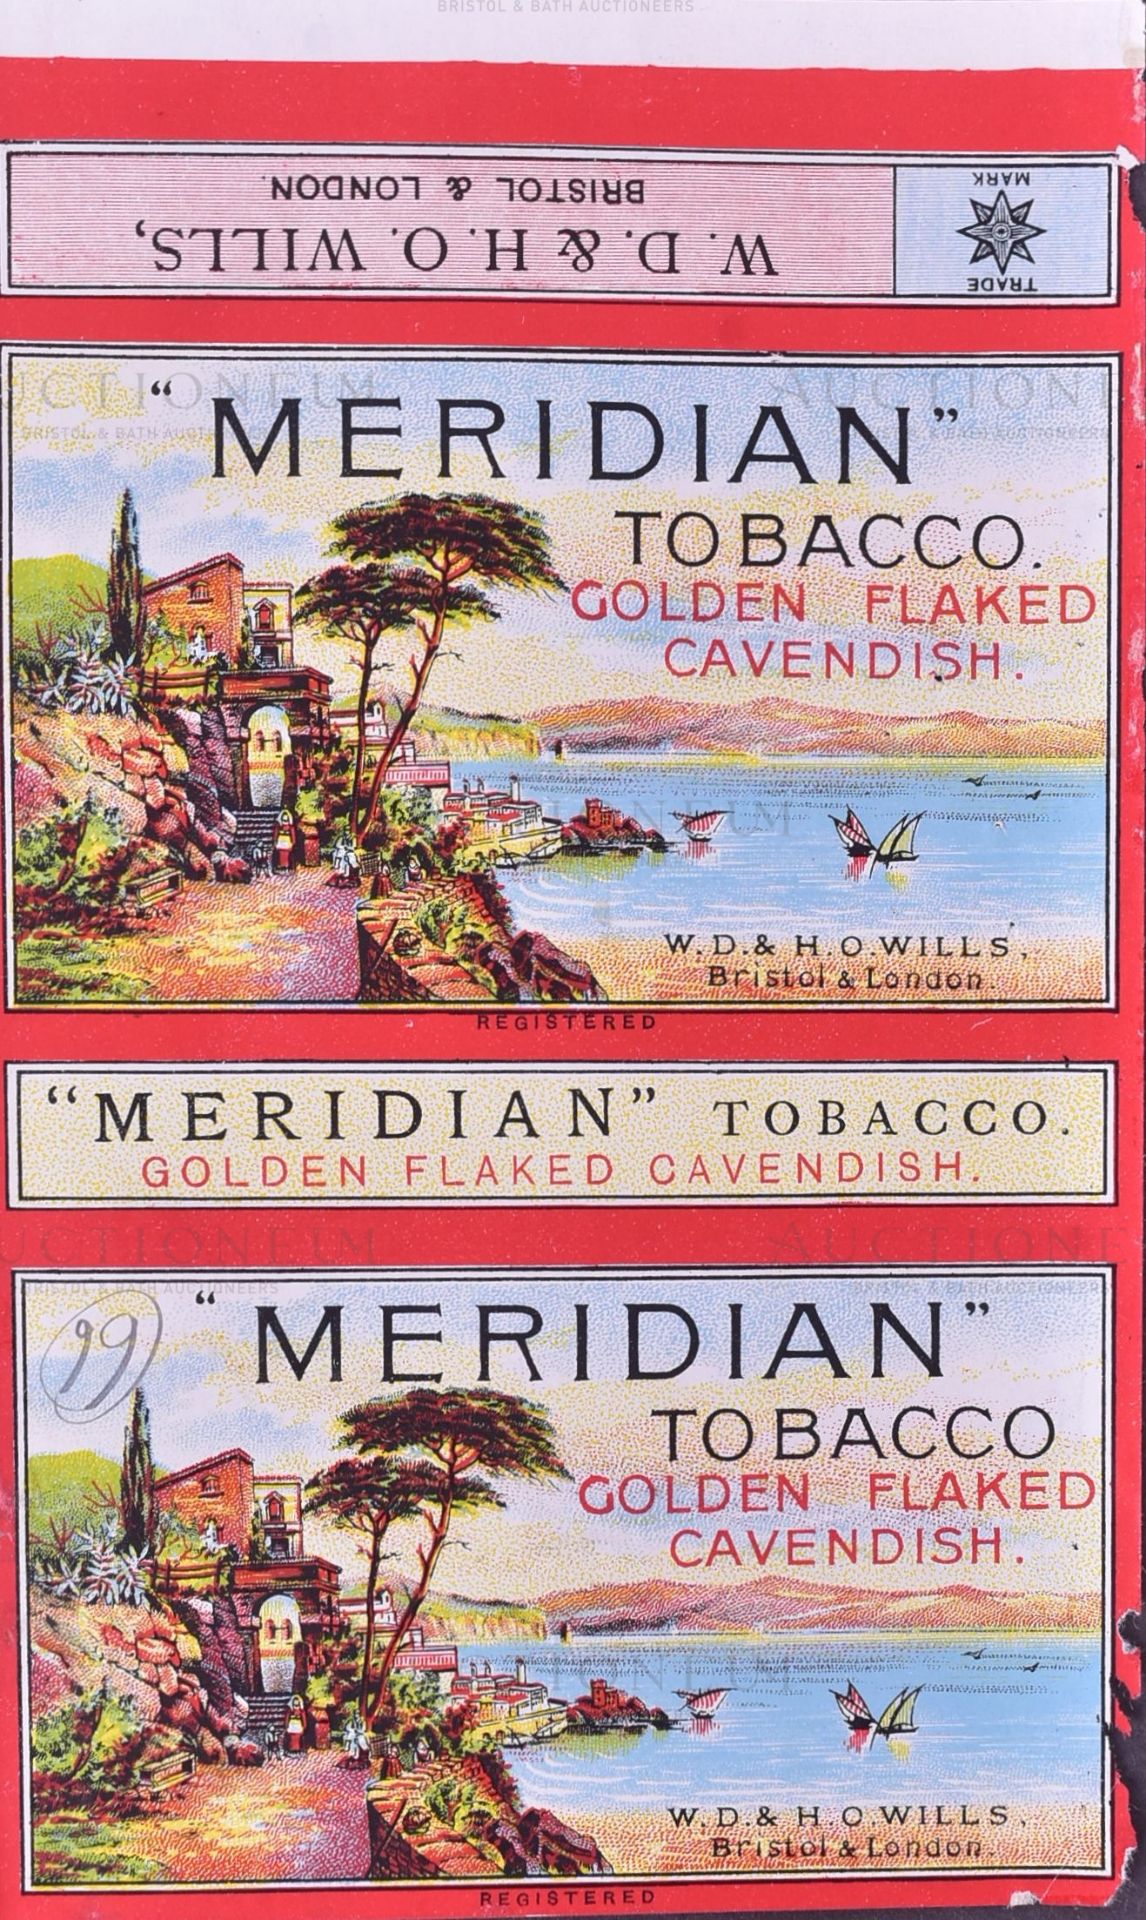 MARDON, SON & HALL - EARLY 20TH CENTURY CIGARETTE PACKET DESIGNS - Image 6 of 7